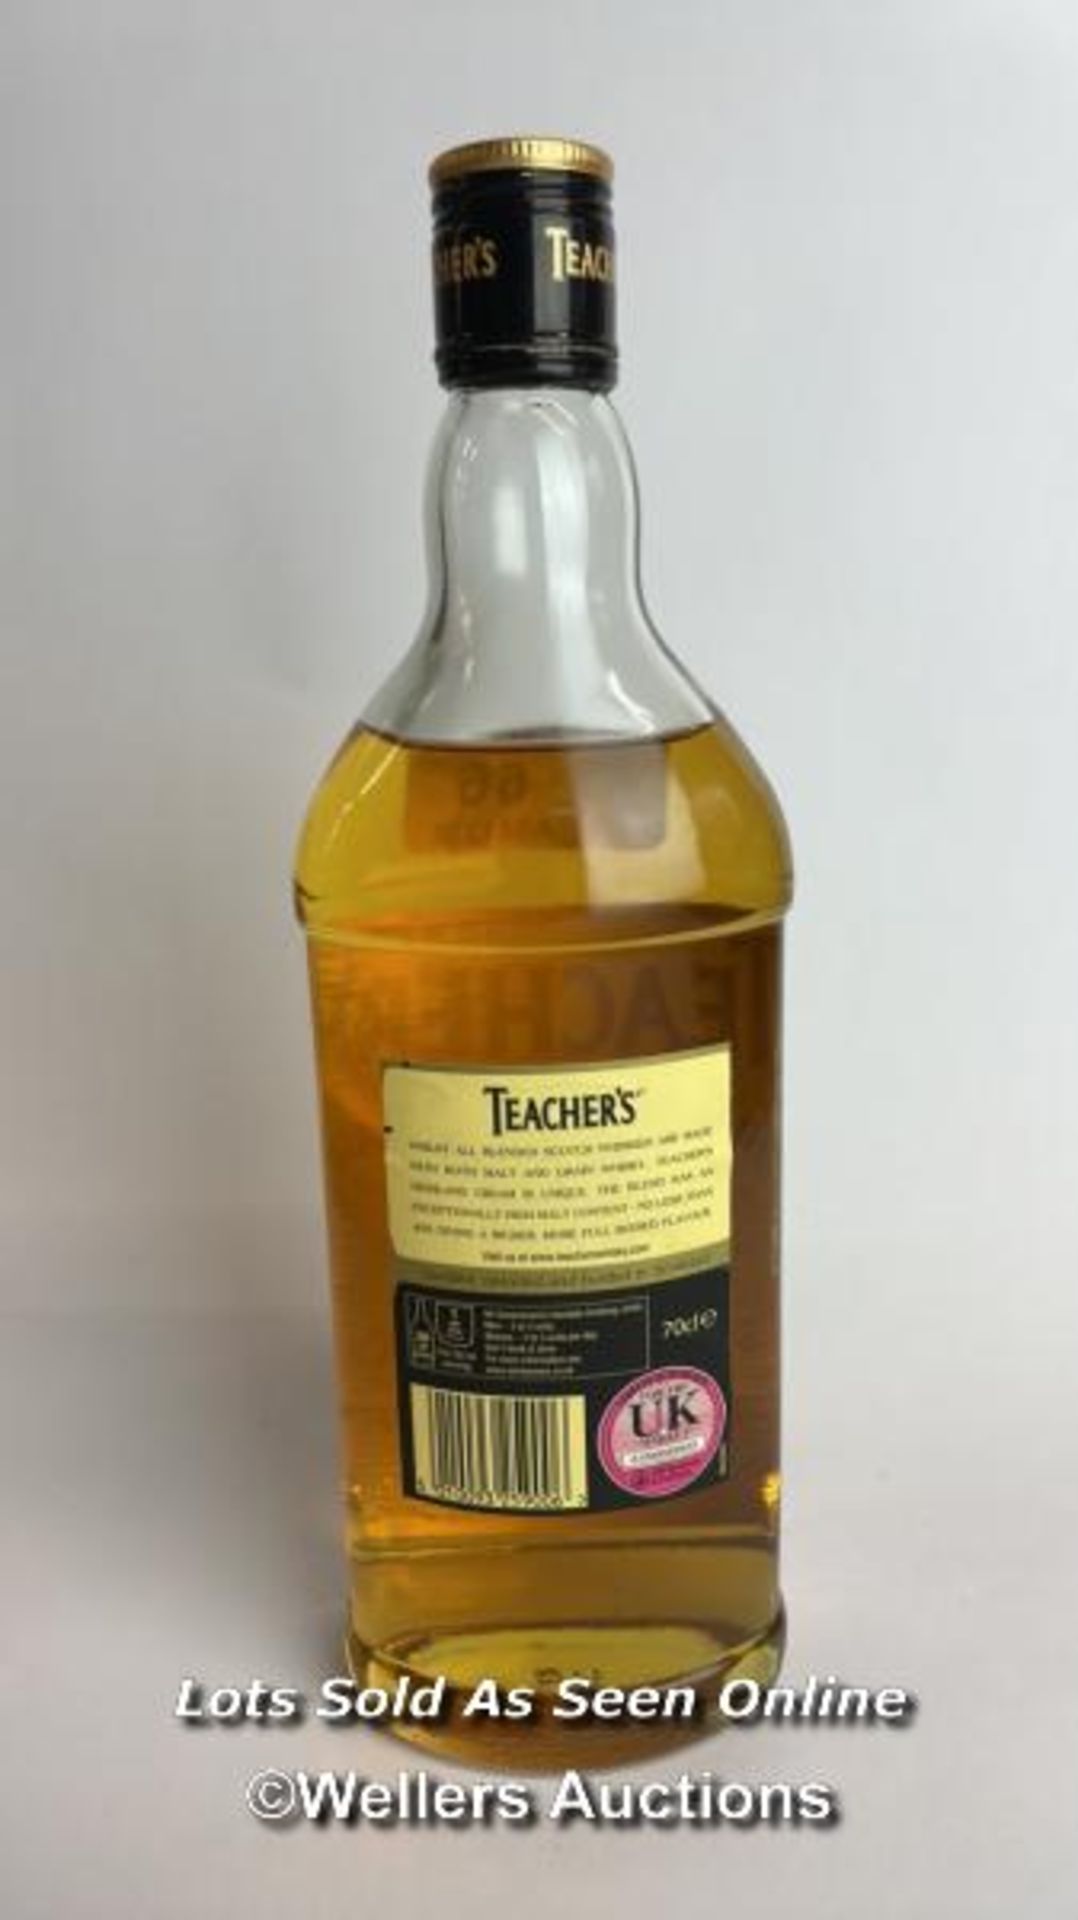 Teachers Highland Cream Scotch Whisky, 70cl, 43% vol / Please see images for fill level and - Image 4 of 5